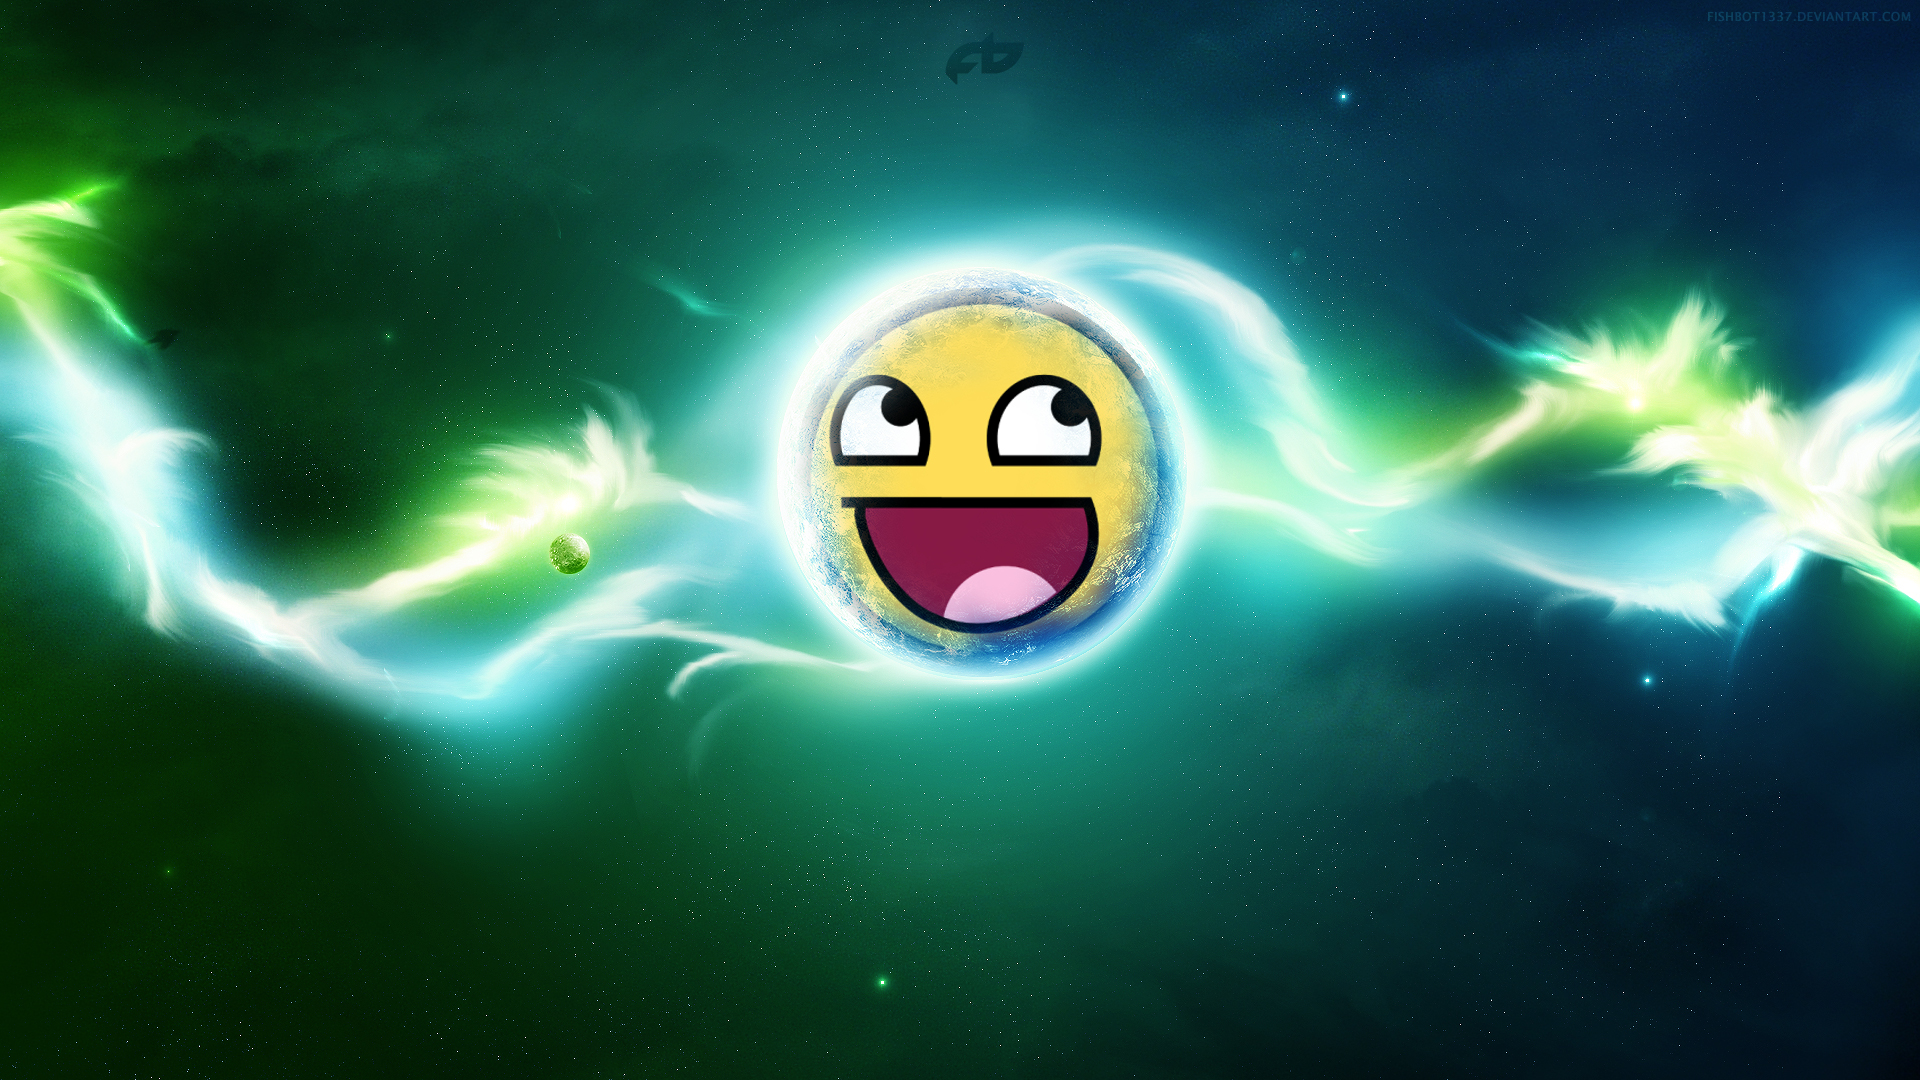 Awesome Smiley Wallpaper Puter P O